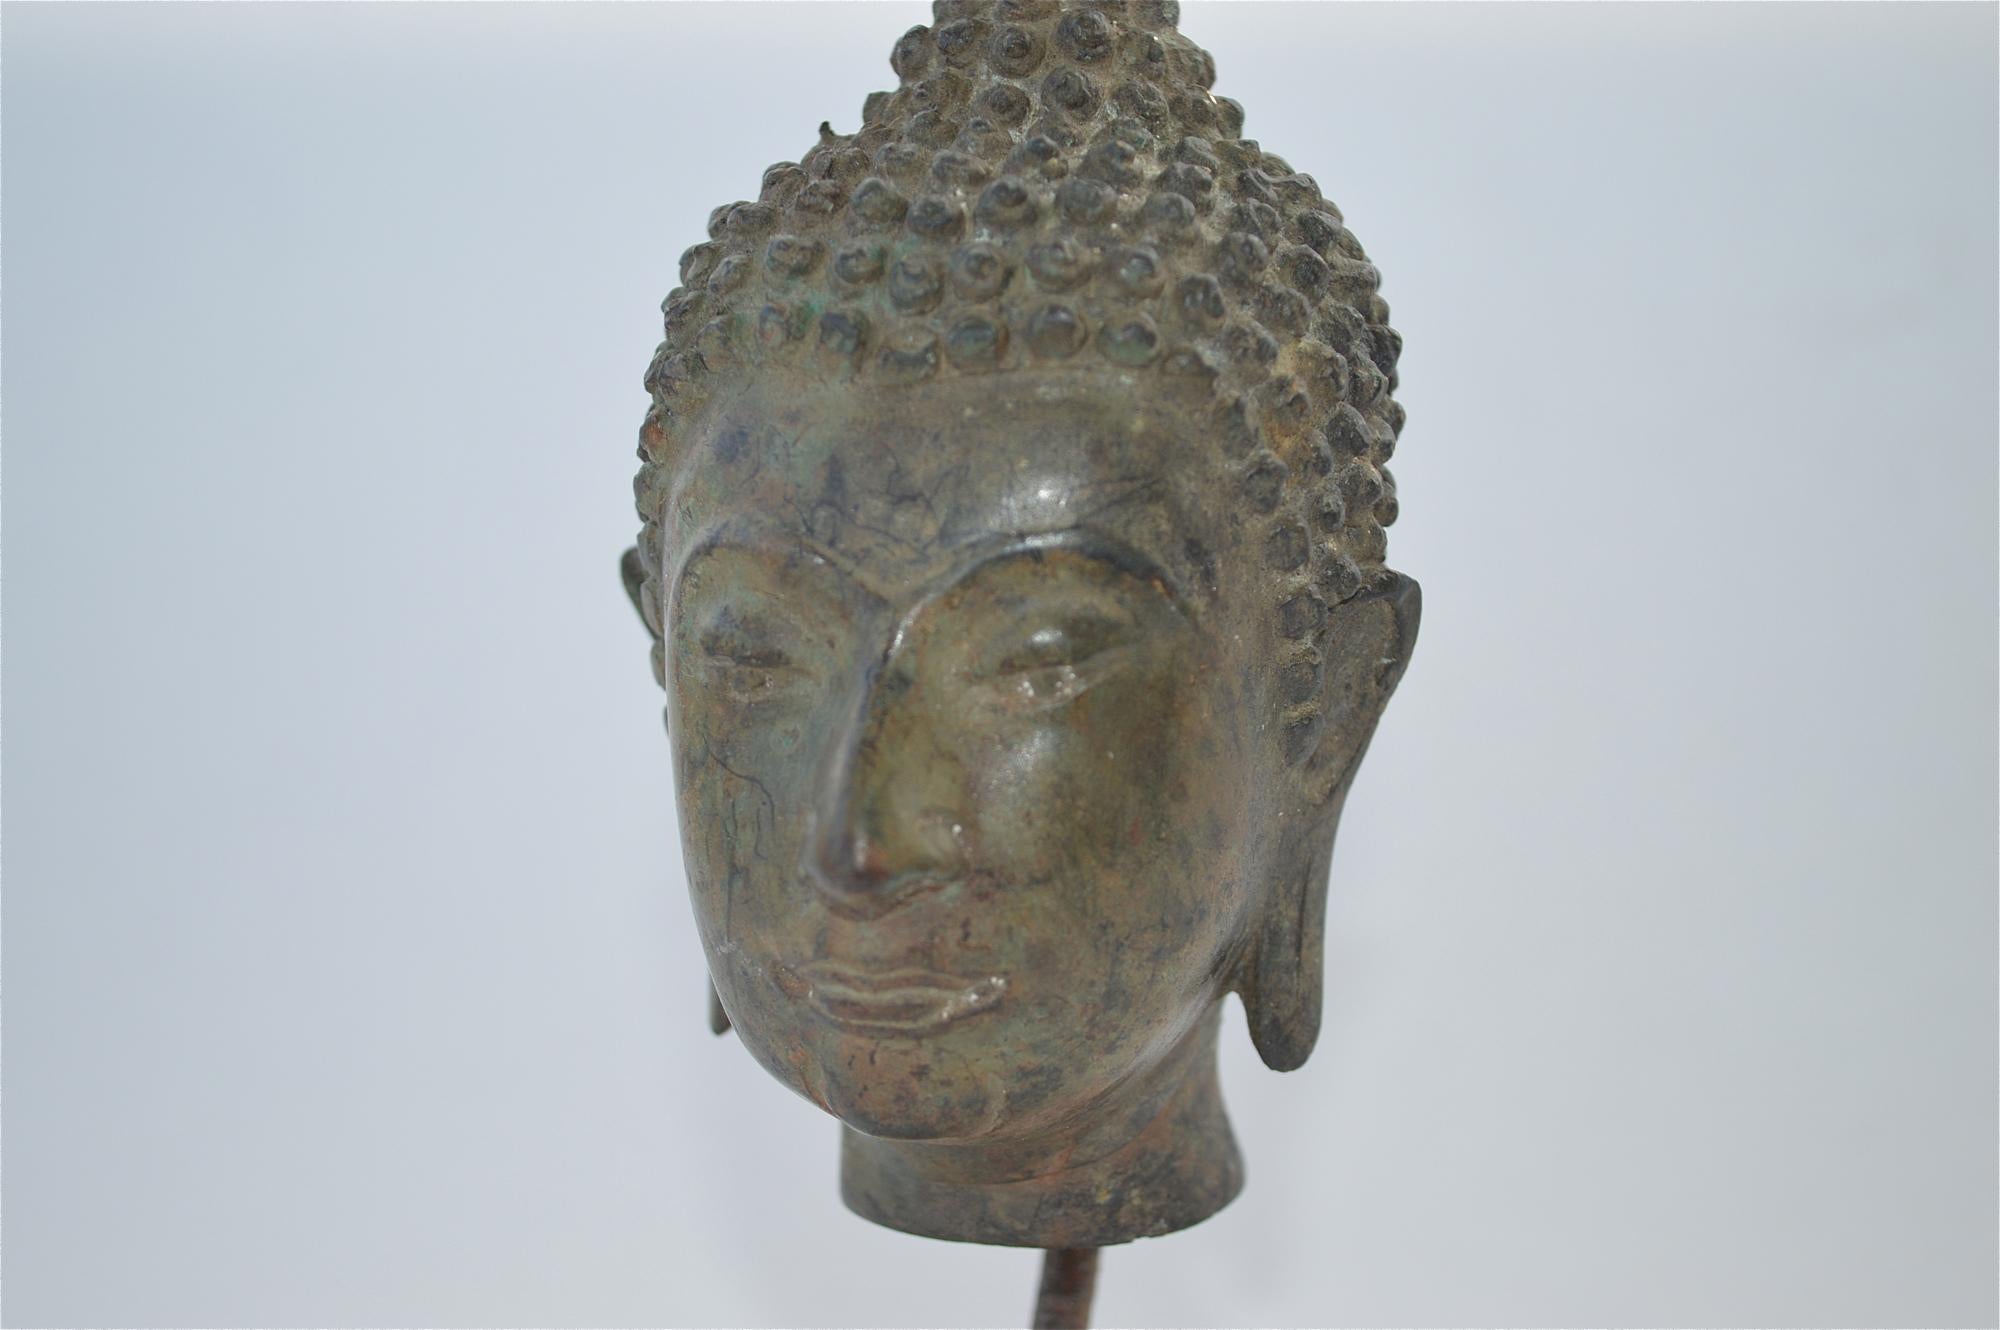 Good quality sculpture of the head of Buddha, cast in bronze with a patinated finish and standing on a marble base. Probably a museum replica after the antiquity and dating from circa 1950s-1960s. Measures: 17.3cms tall, 6 3/4 inches tall.